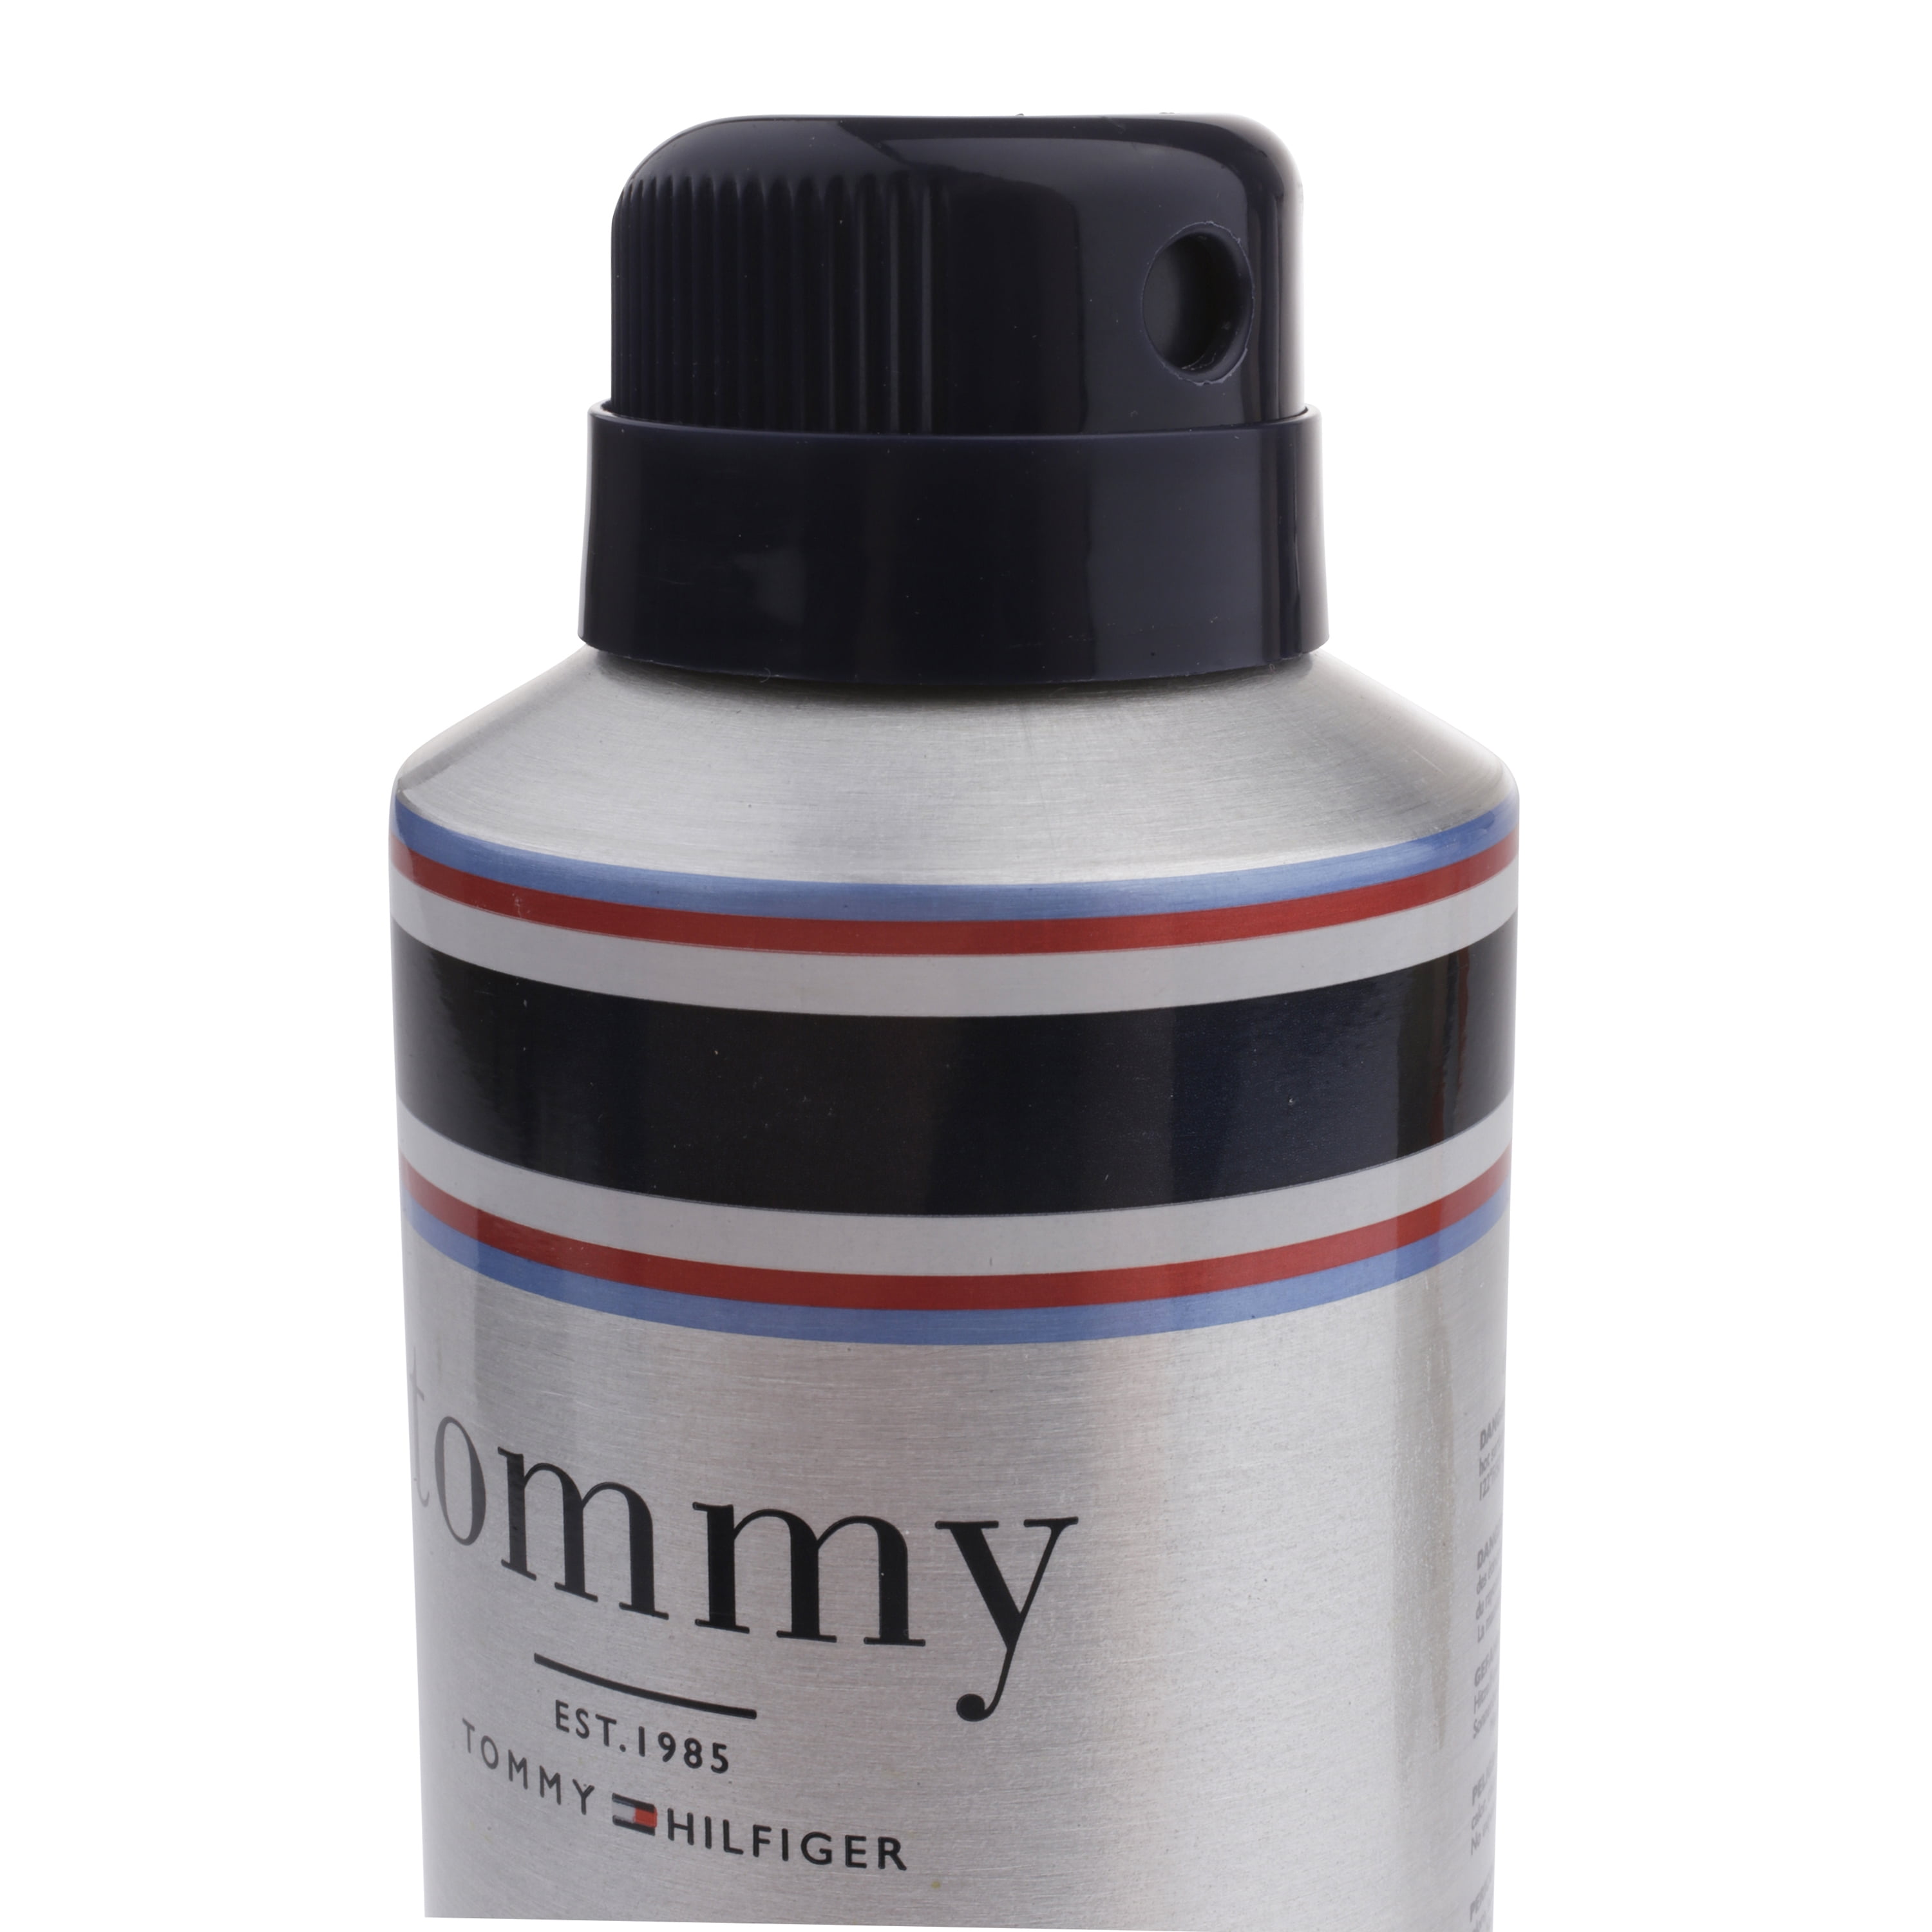 tommy all over body spray